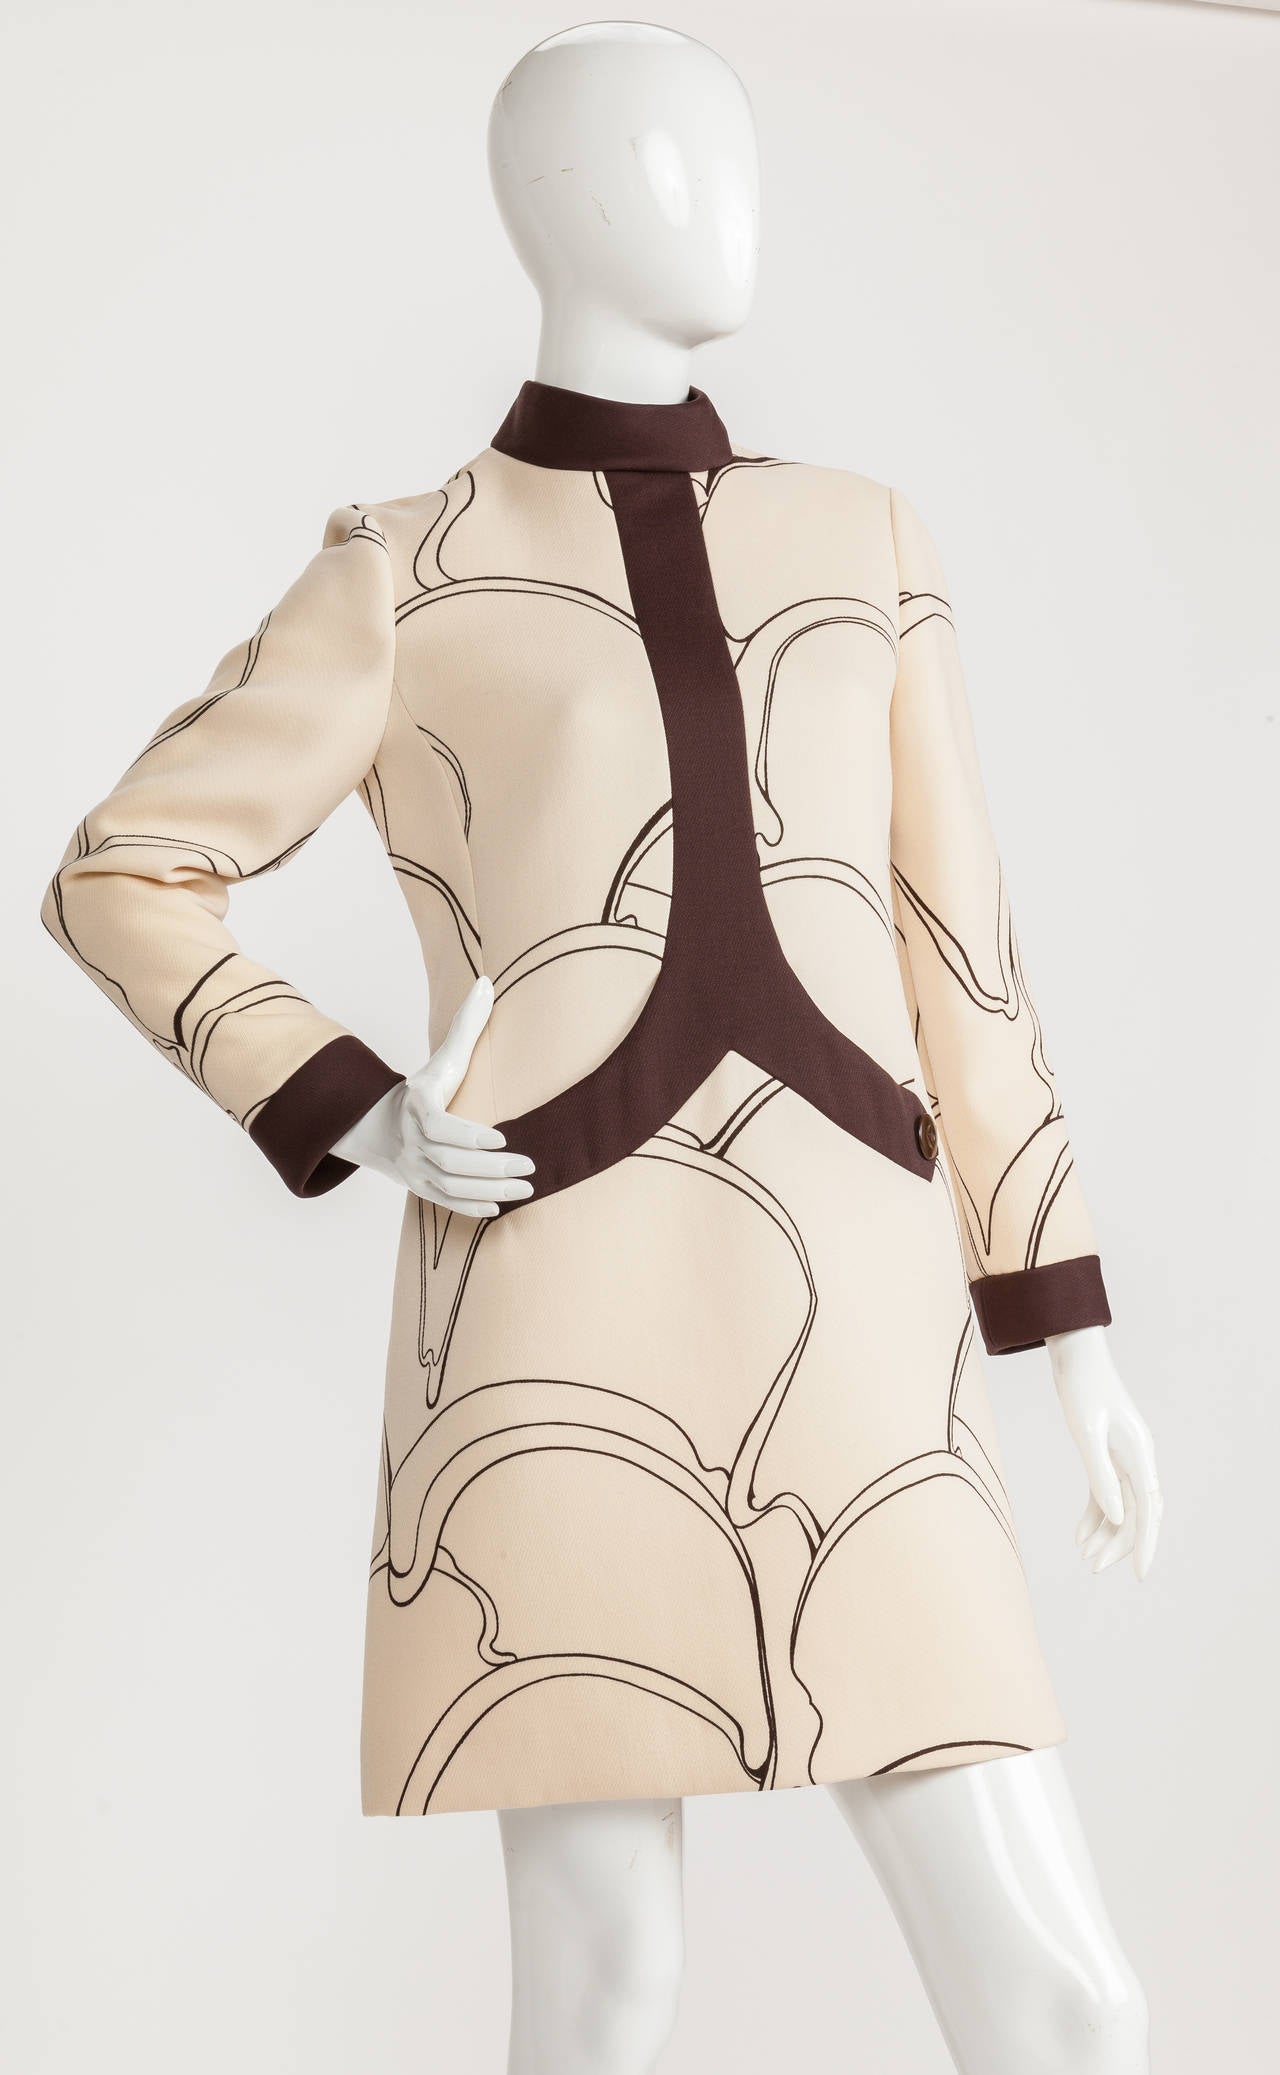 A 1969 Pierre Cardin wool mini-dress with an abstract organic print in brown on a creme background and a contrasting brown band at the standing collar that bisects the bodice and finishes in two curved pocket bands and button trim. Also features